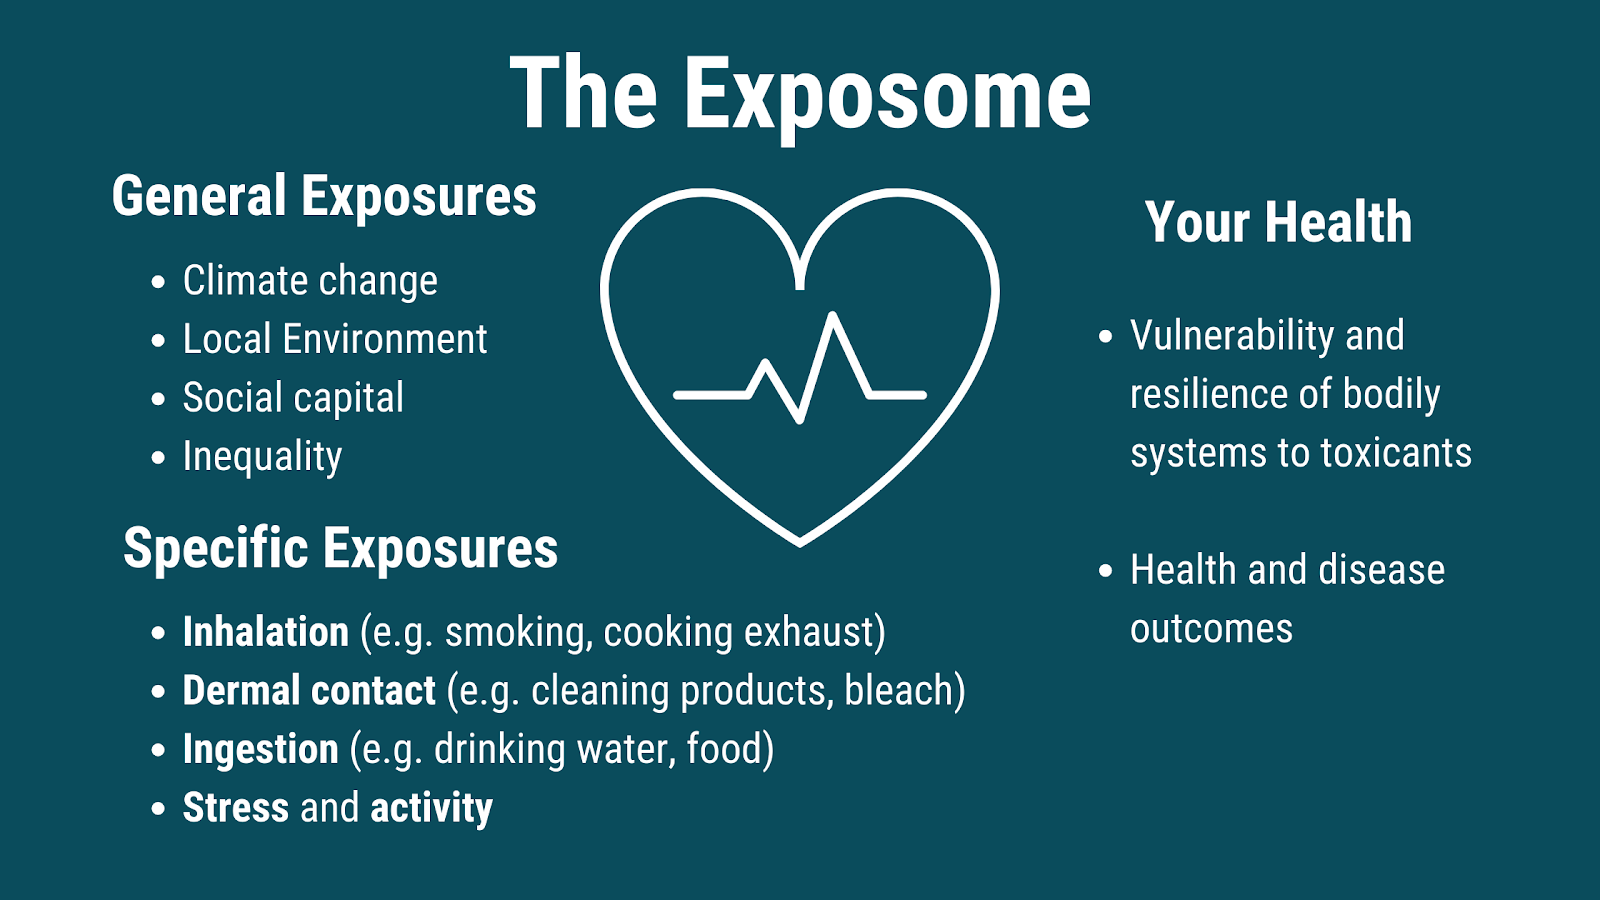 What is the exposome?